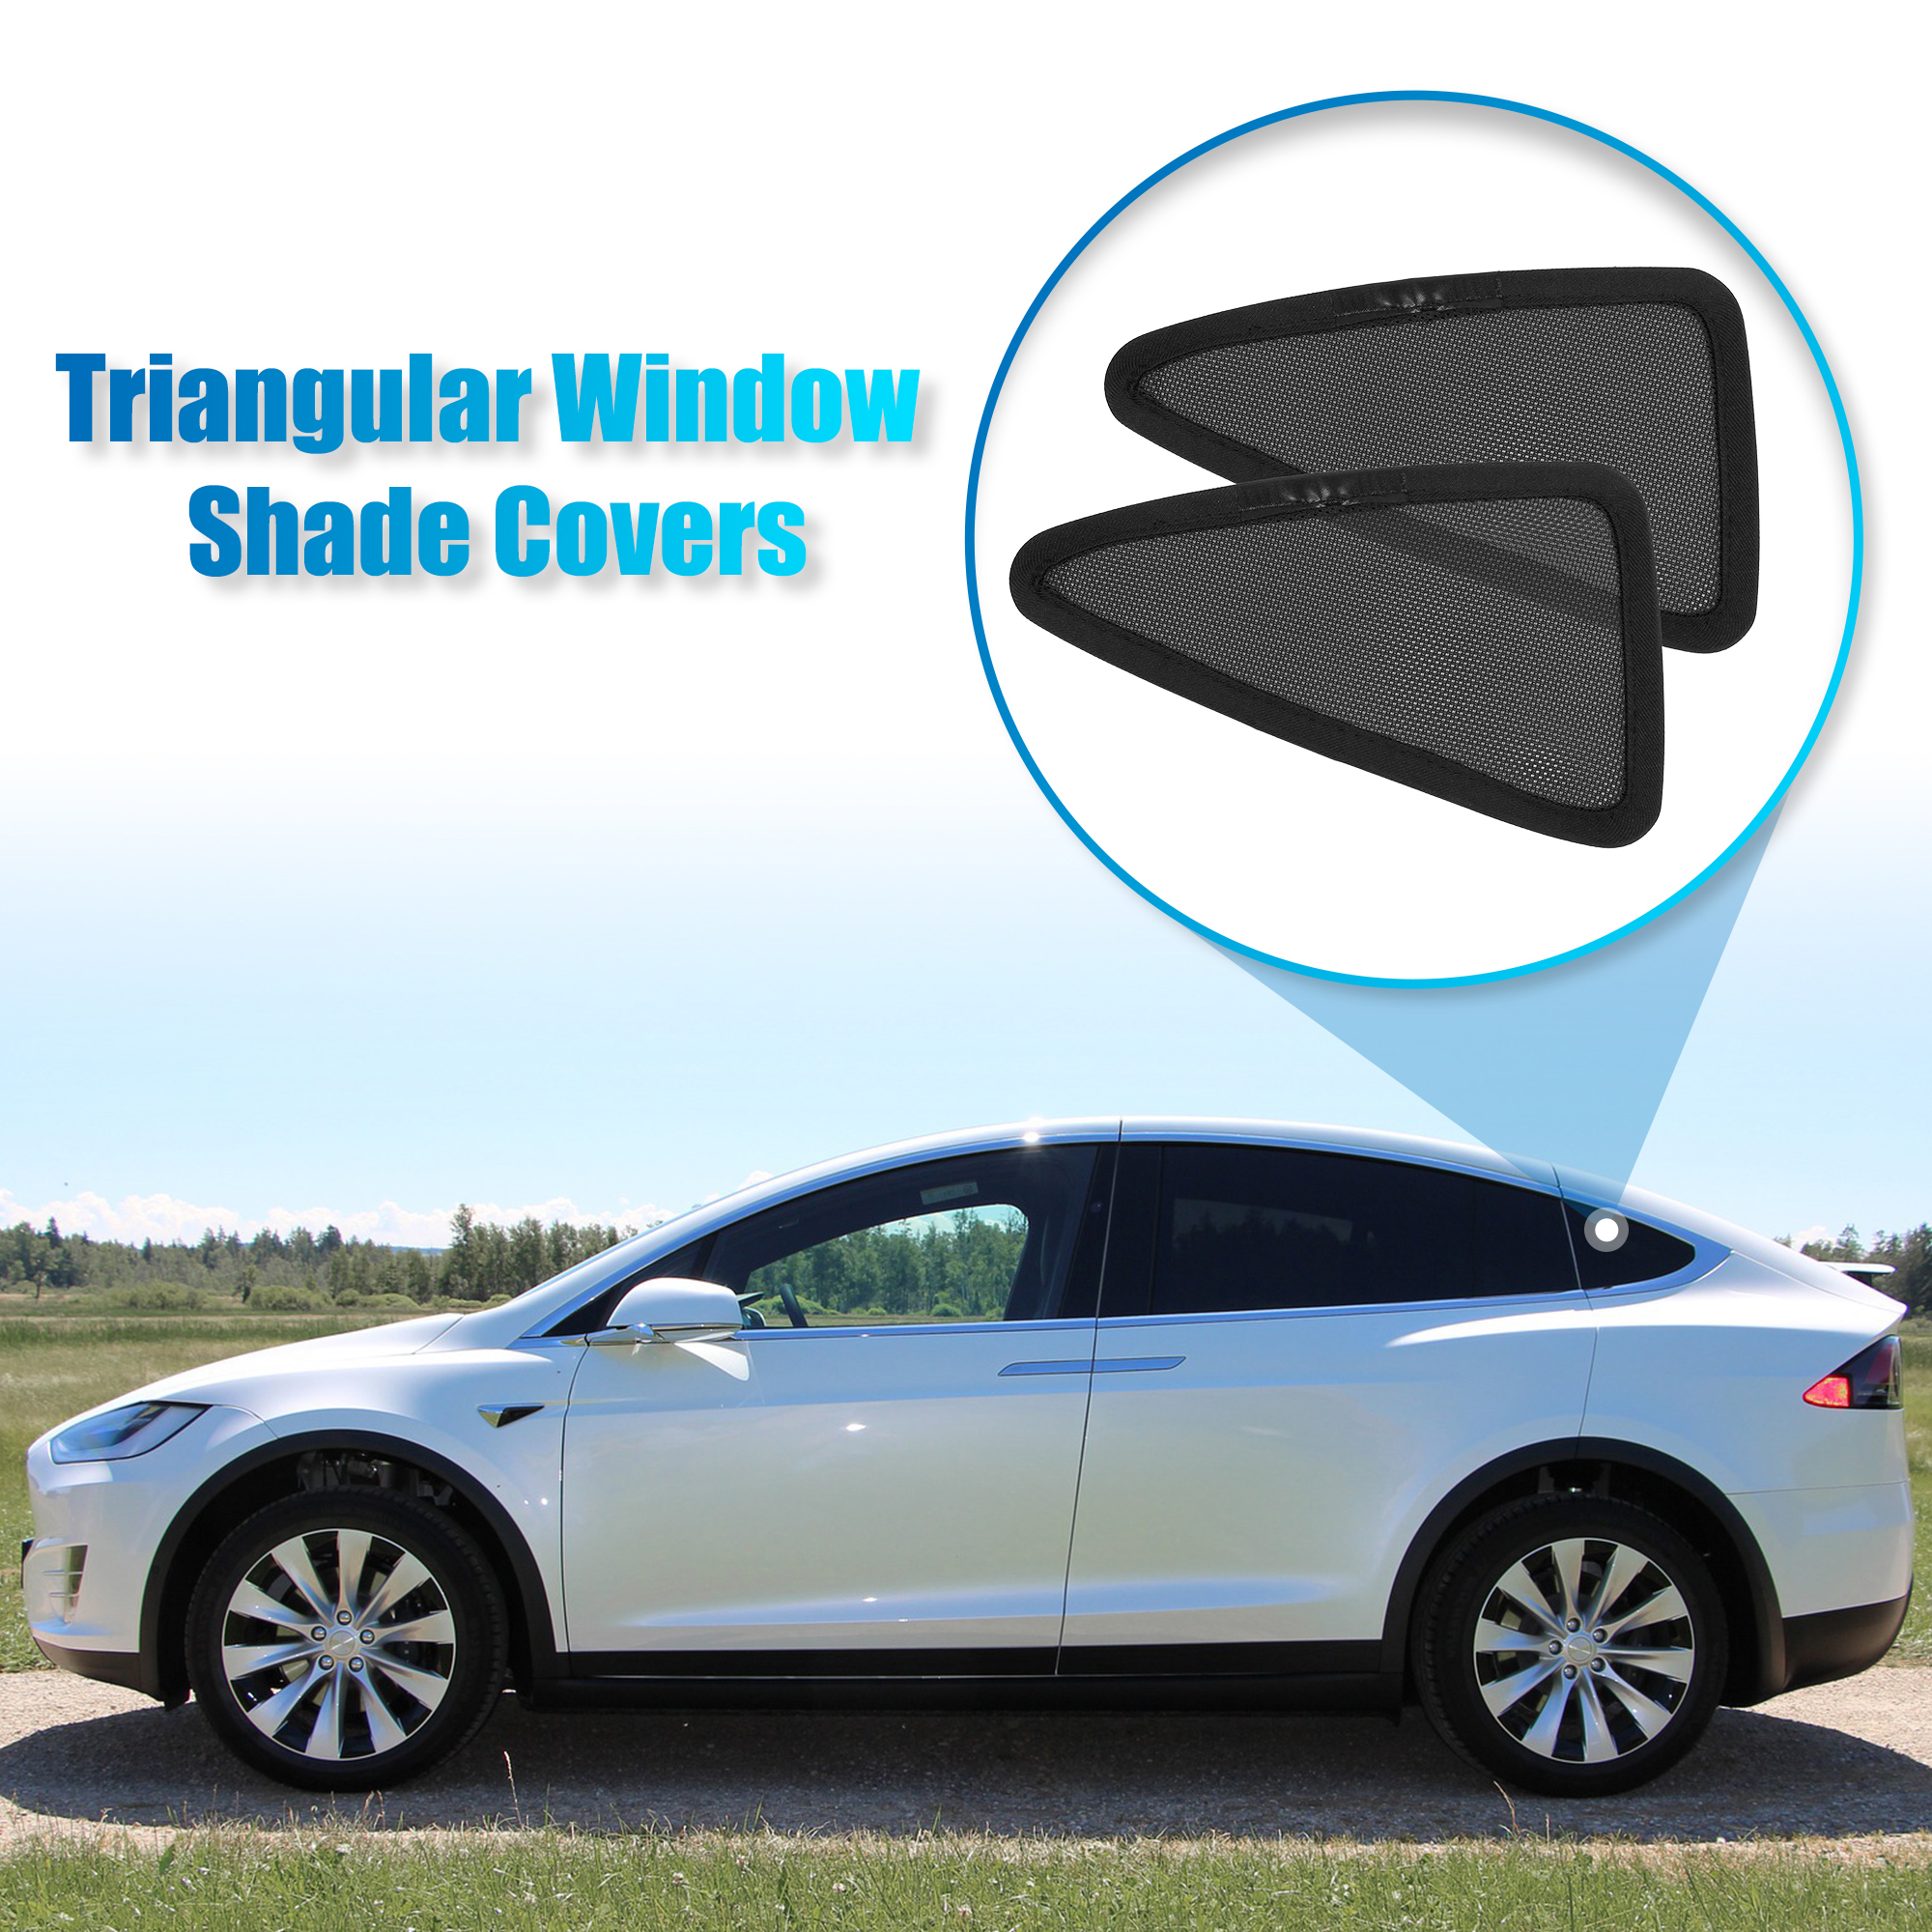 Unique Bargains 2 Pcs Glass Shade Cover Triangular Window Sun Shade Cover for Tesla Model X